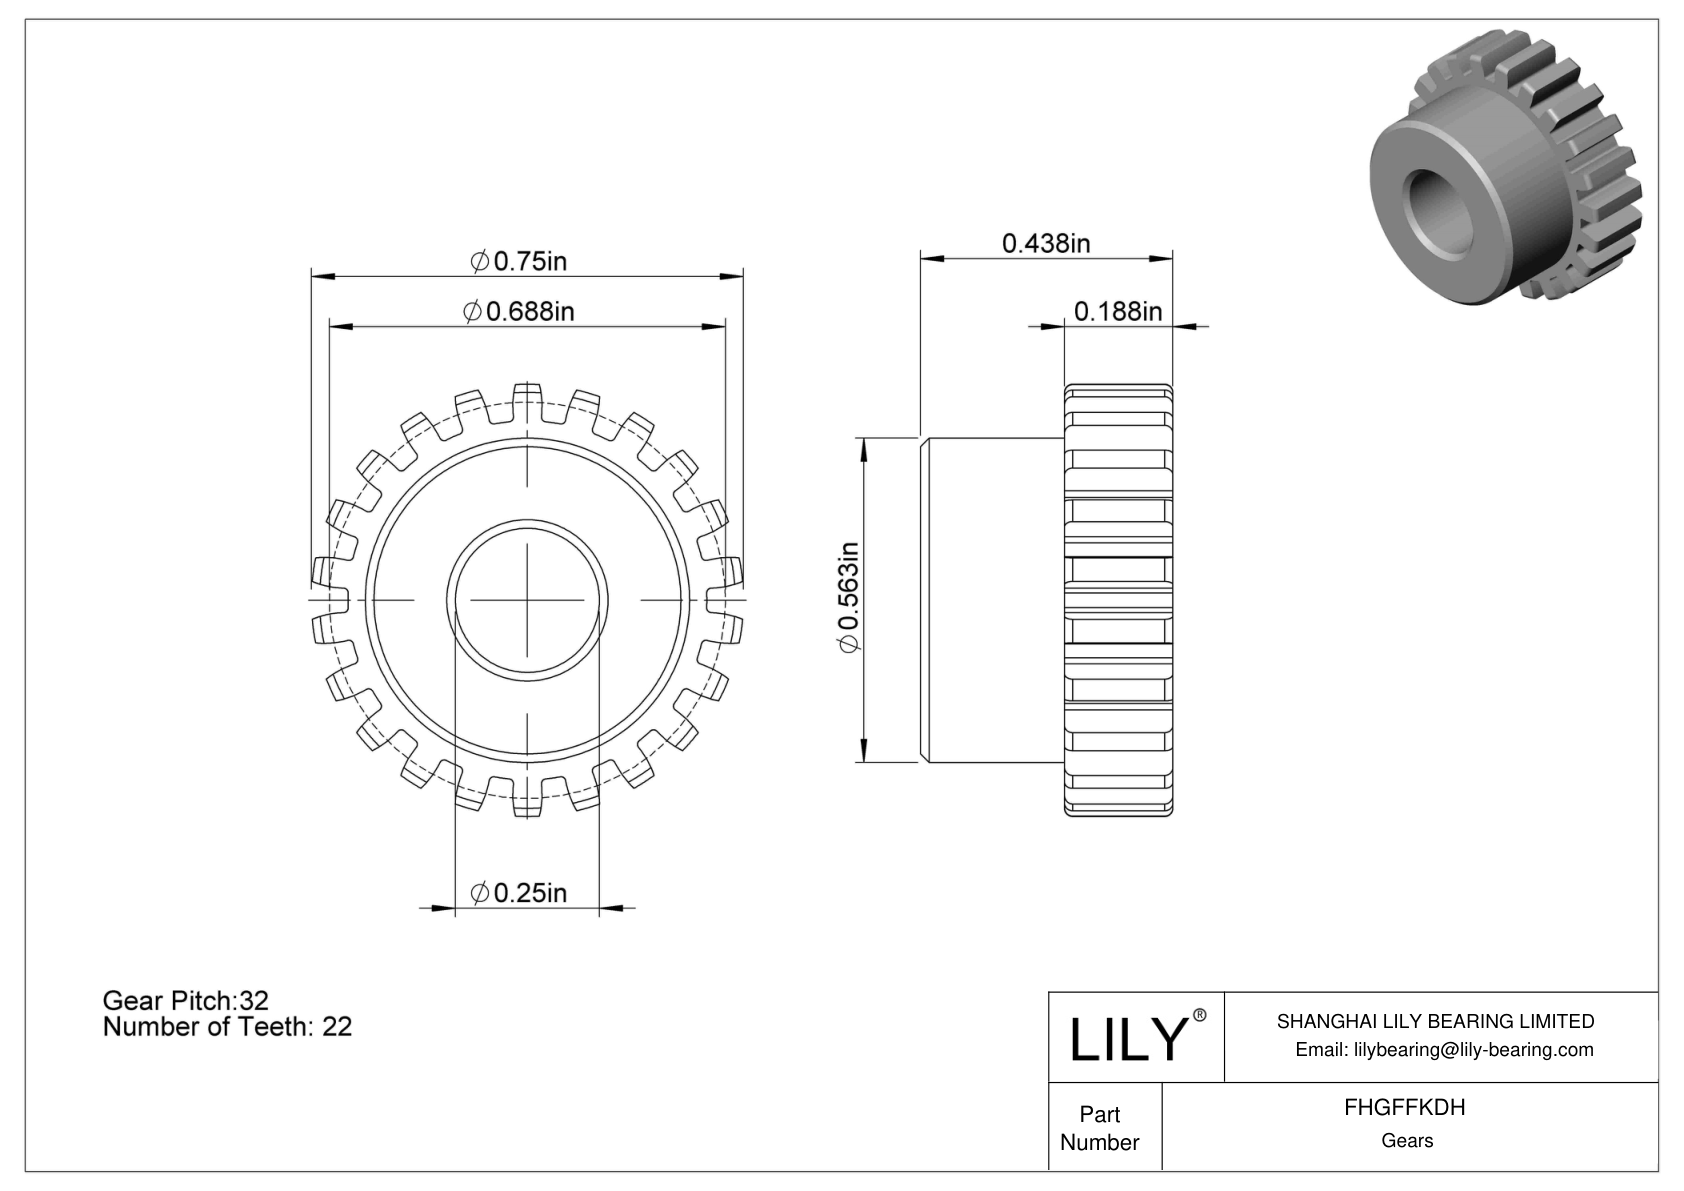 FHGFFKDH Plastic Gears - 14 1/2° Pressure Angle cad drawing